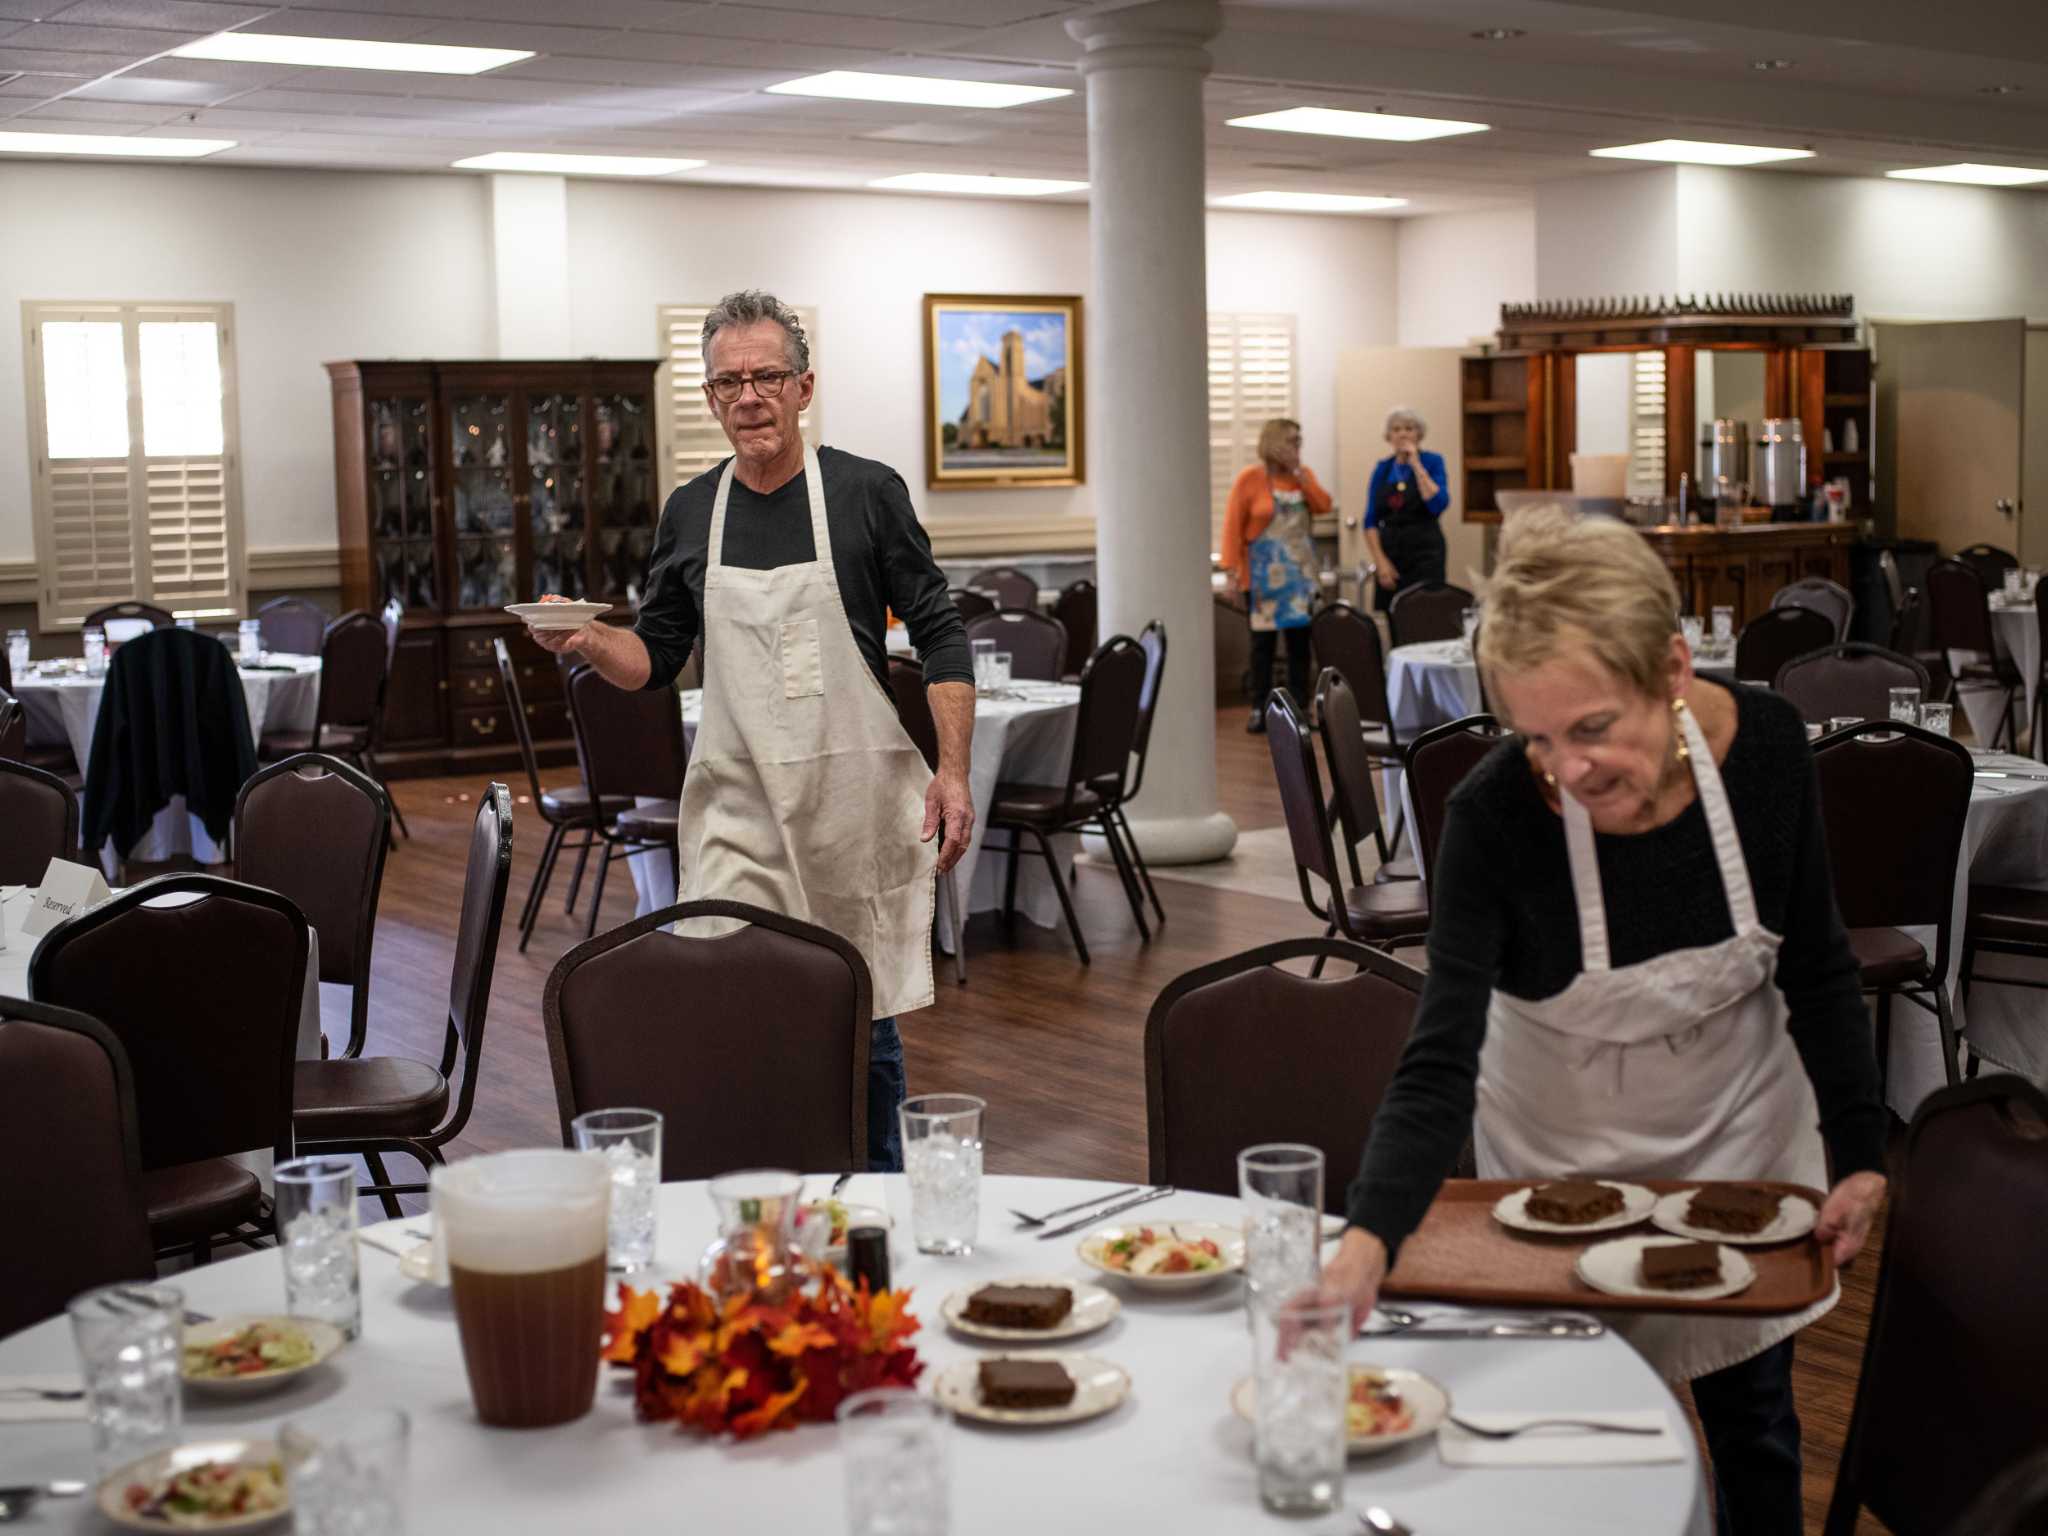 Downtown San Antonio church volunteers turn their after-concert luncheon into informal ministry - San Antonio Express-News